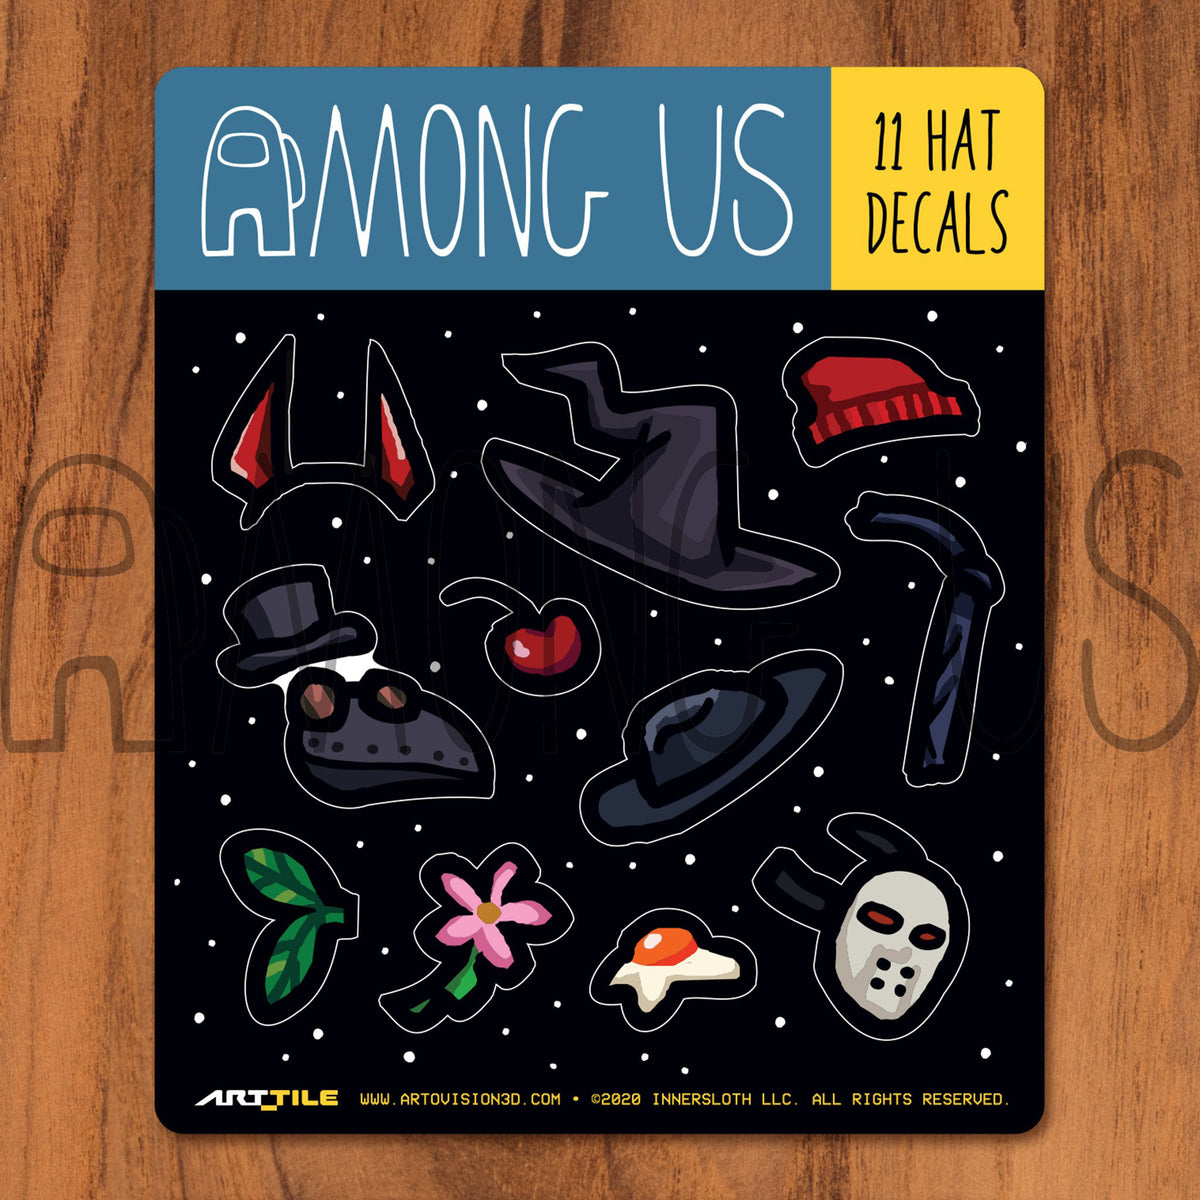 Among Us: Crewmate Art Tile Decals by Artovision3D